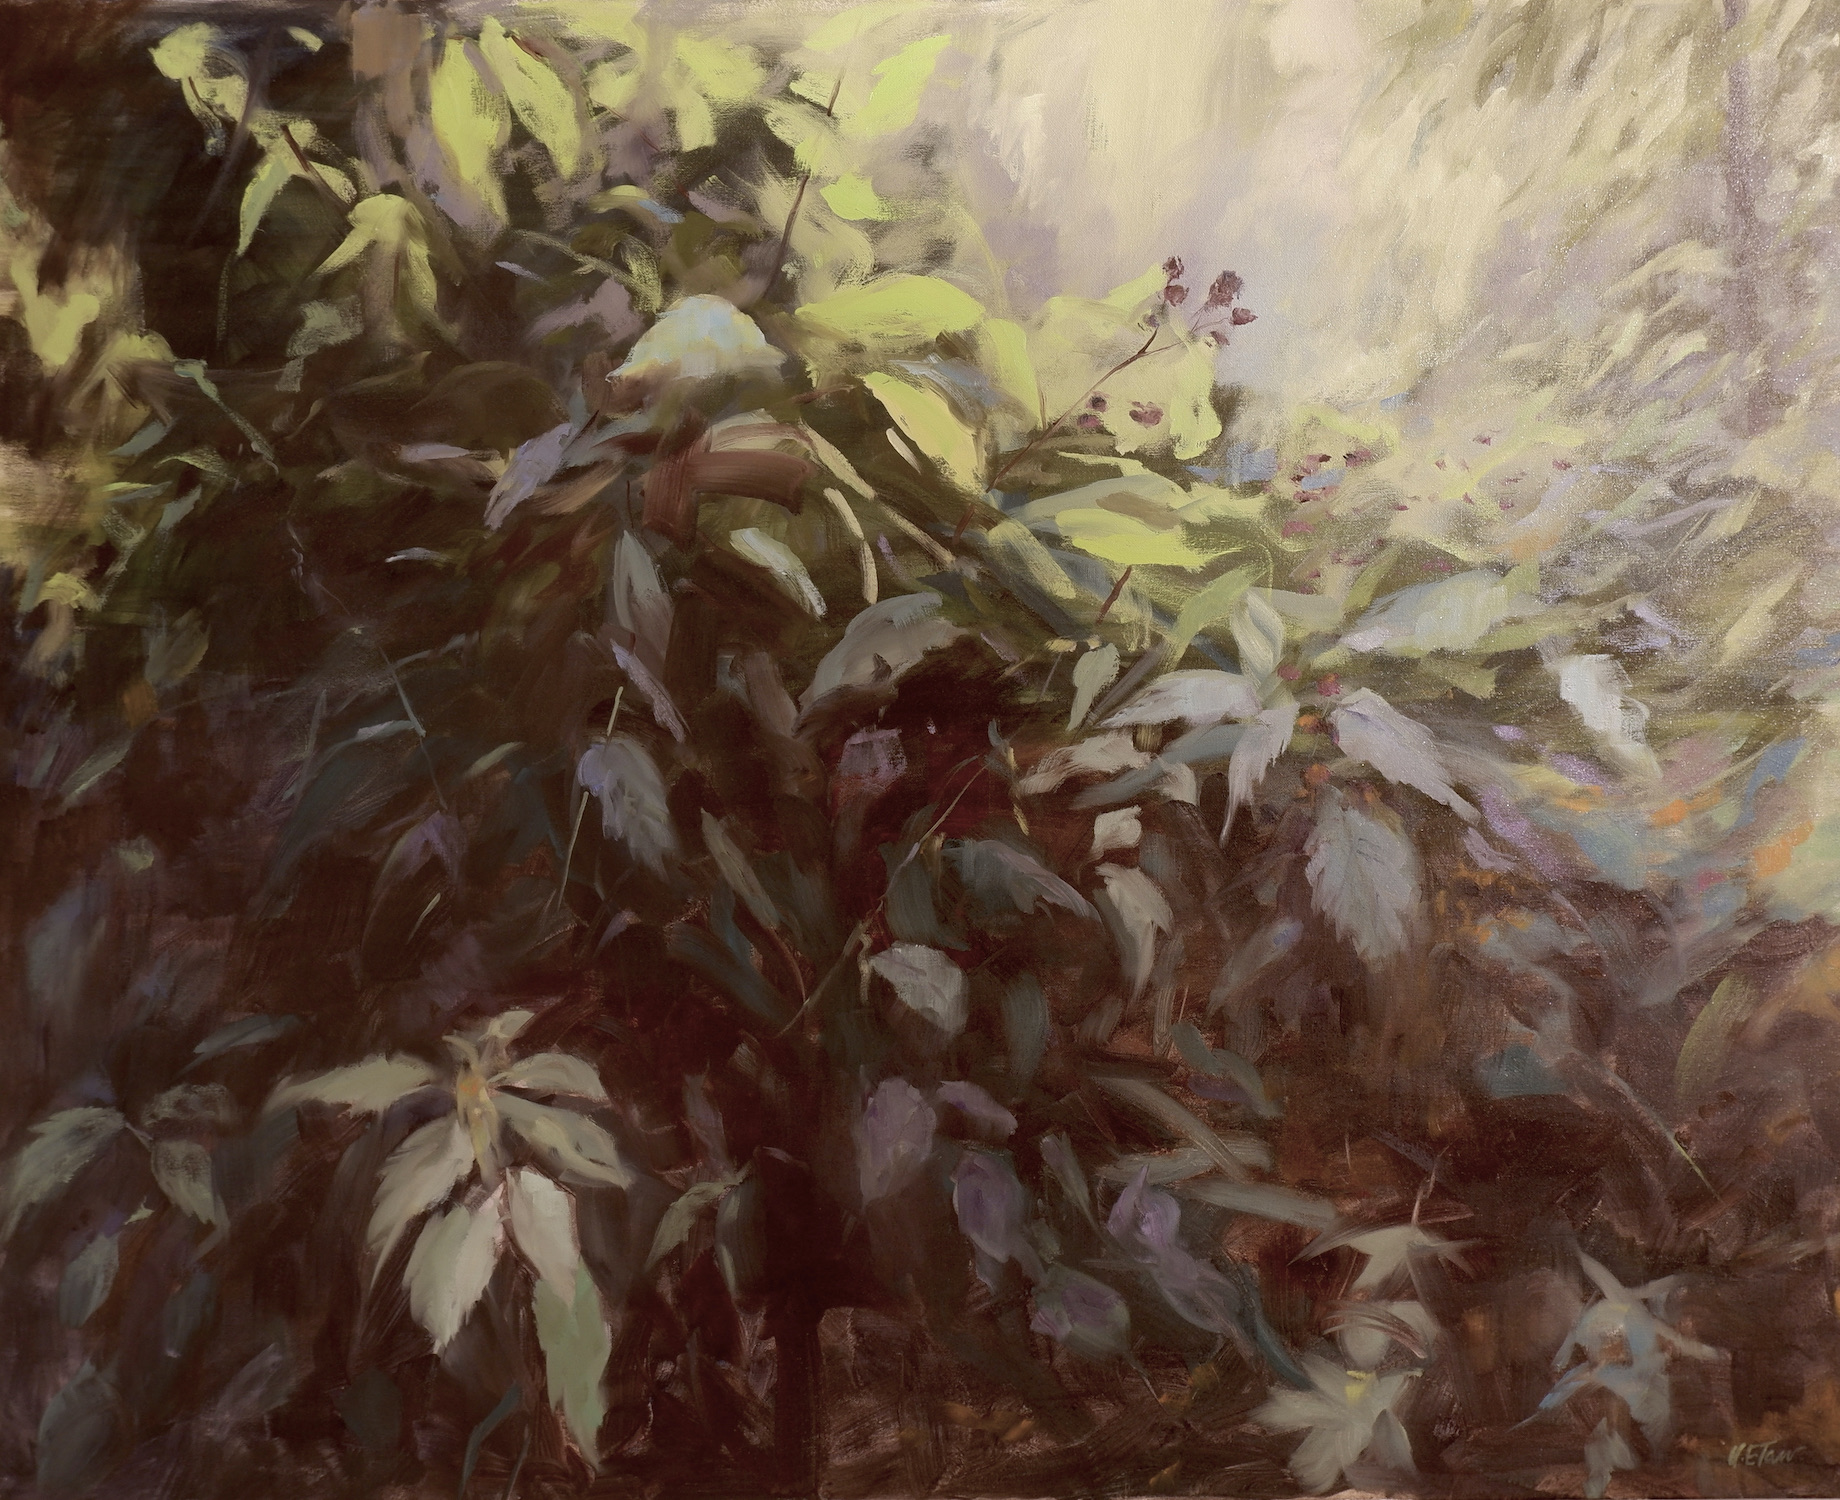 'Stingers And Thorns', Helen Tarr, Oil on canvas, 81 x 102 cm